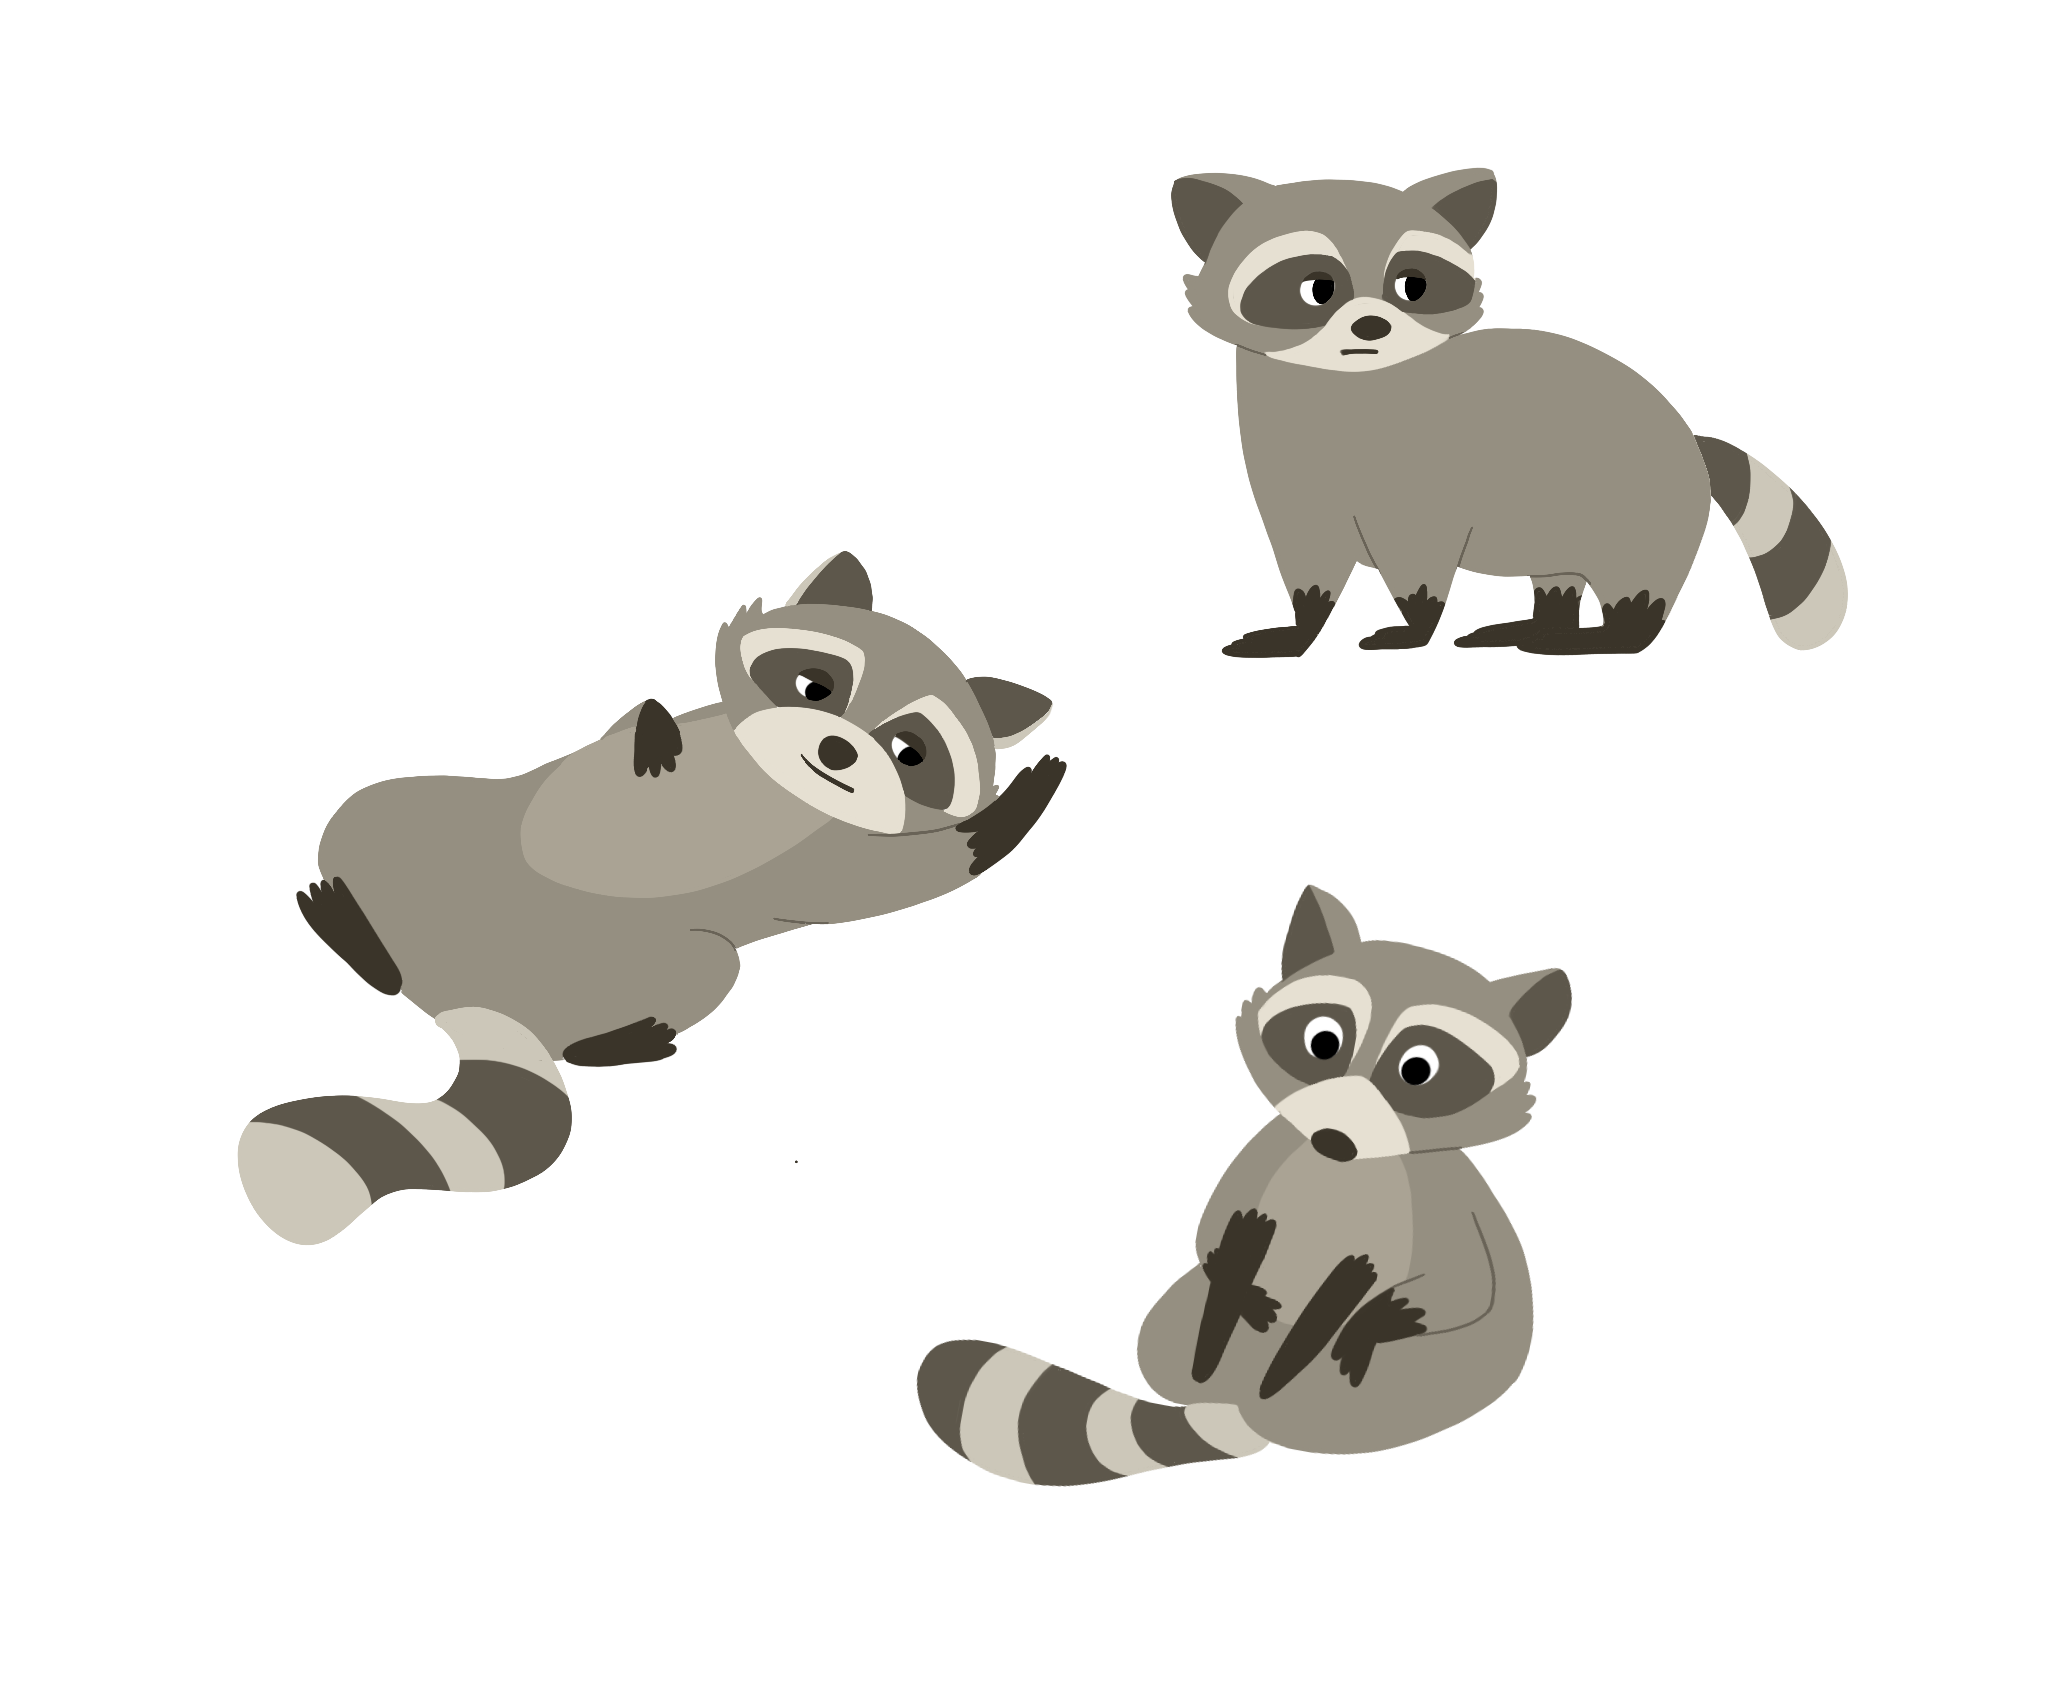 There are three cutely drawn raccoons in the picture. In the right hand corner is one on four legs looking to the right. The one in the middle left is laid out promiscuously and the one in the bottom right is sitting holding on to it's legs with it's tiny paws.